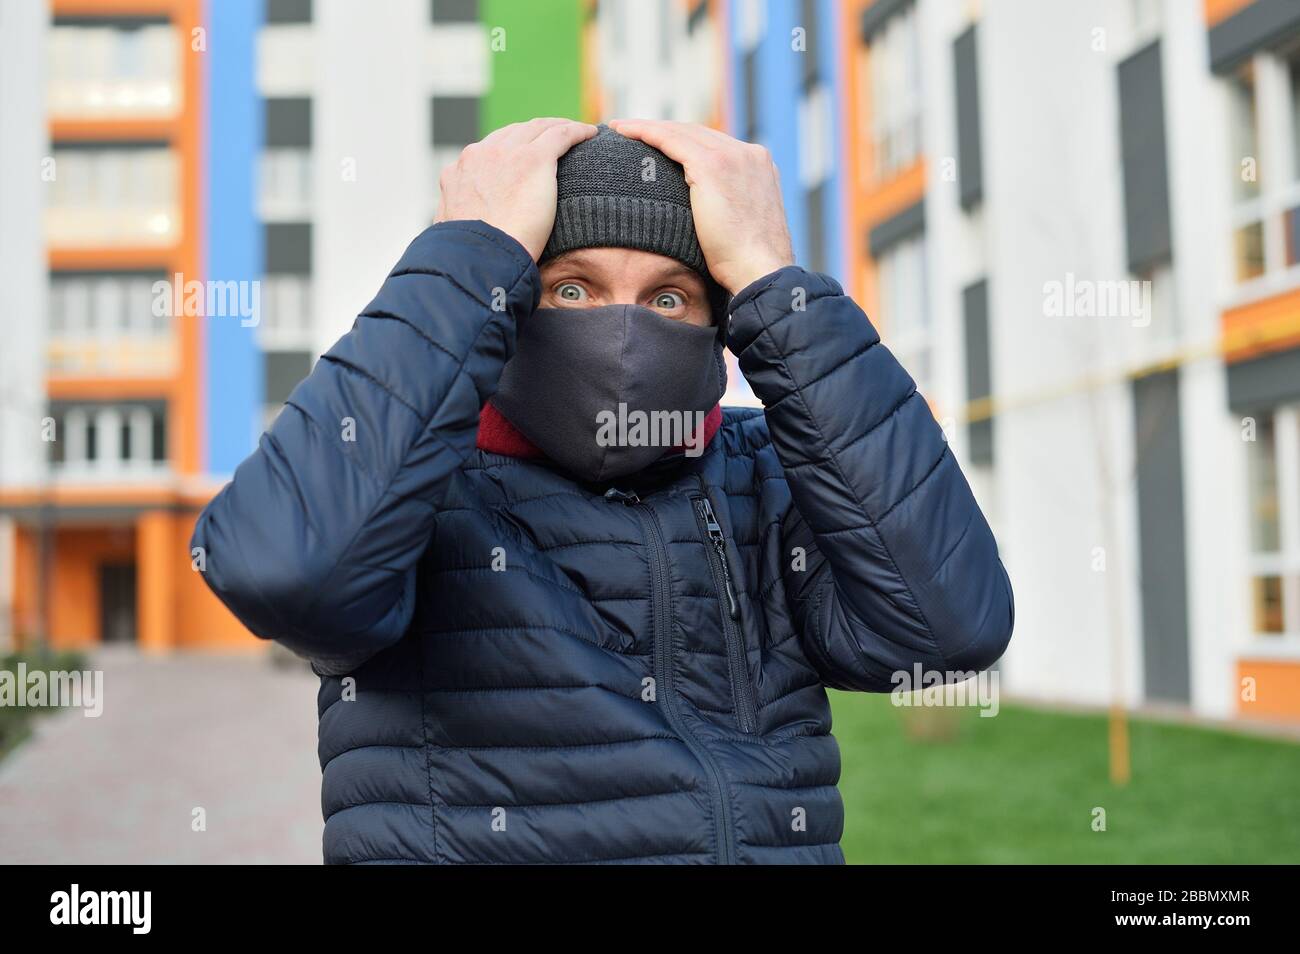 Coronavirus panic. Man with a mask on his face in the city panic over the bad news concerning corona virus Stock Photo